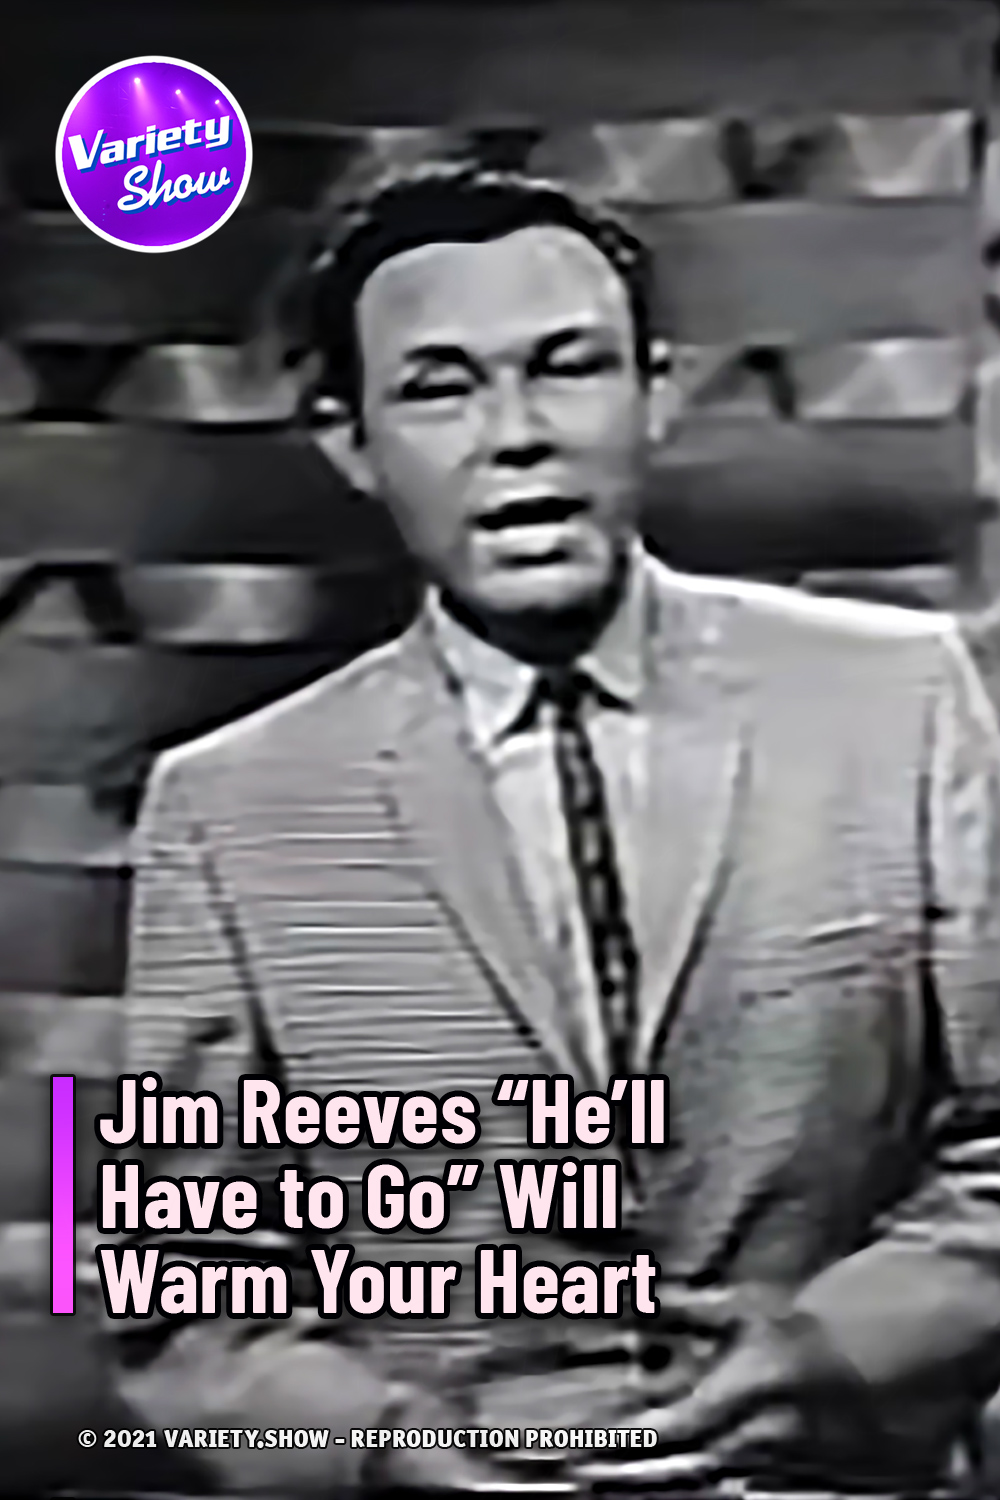 Jim Reeves “He’ll Have to Go” Will Warm Your Heart